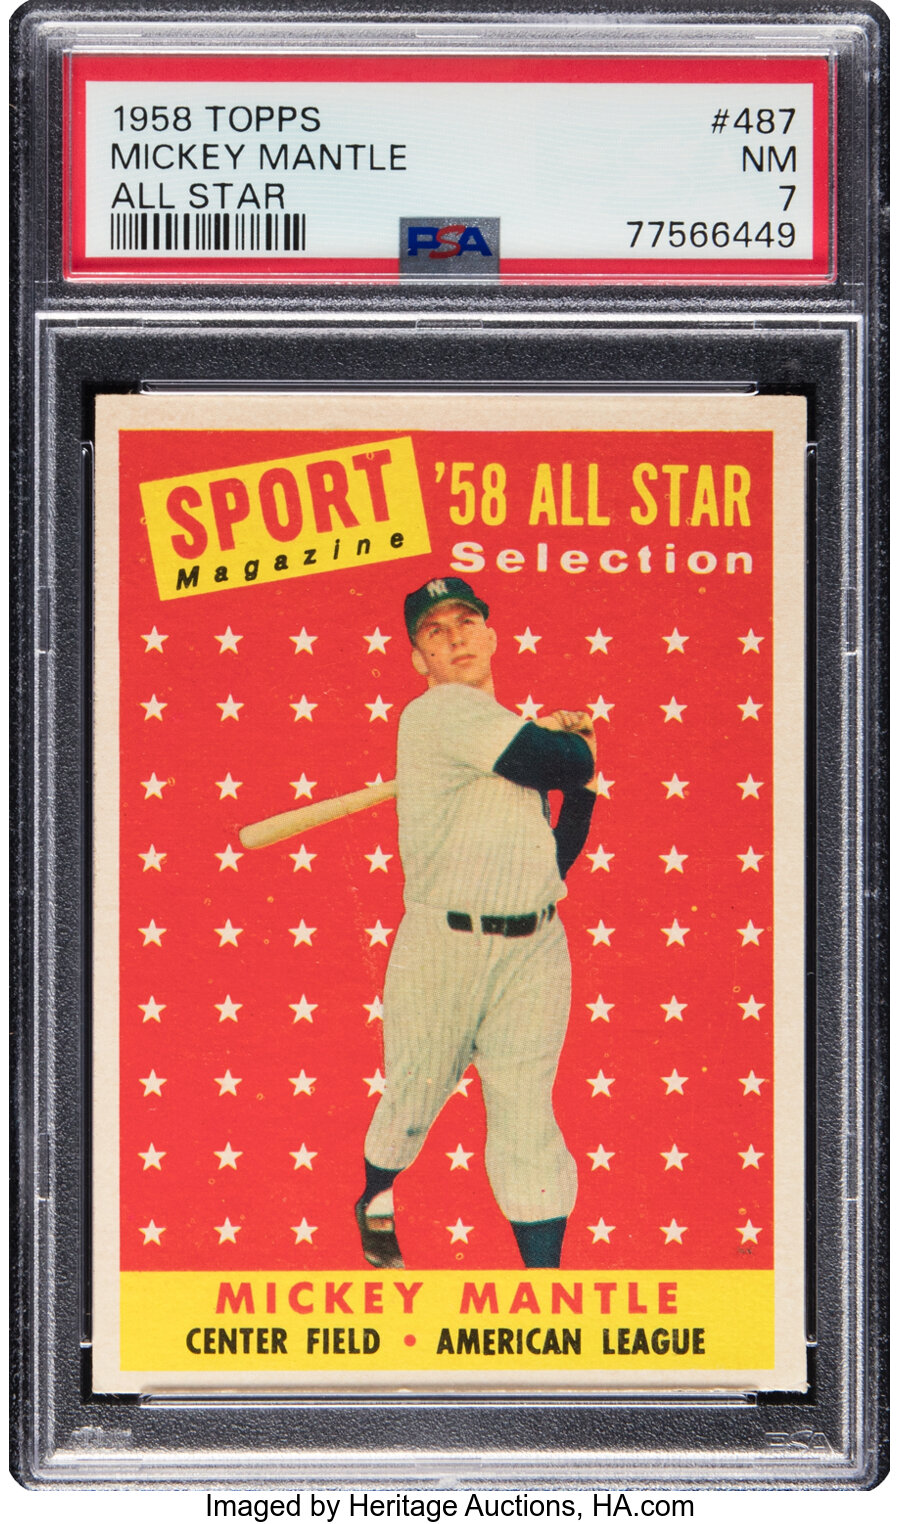 1958 Topps Mickey Mantle (All Star) #487 PSA NM 7